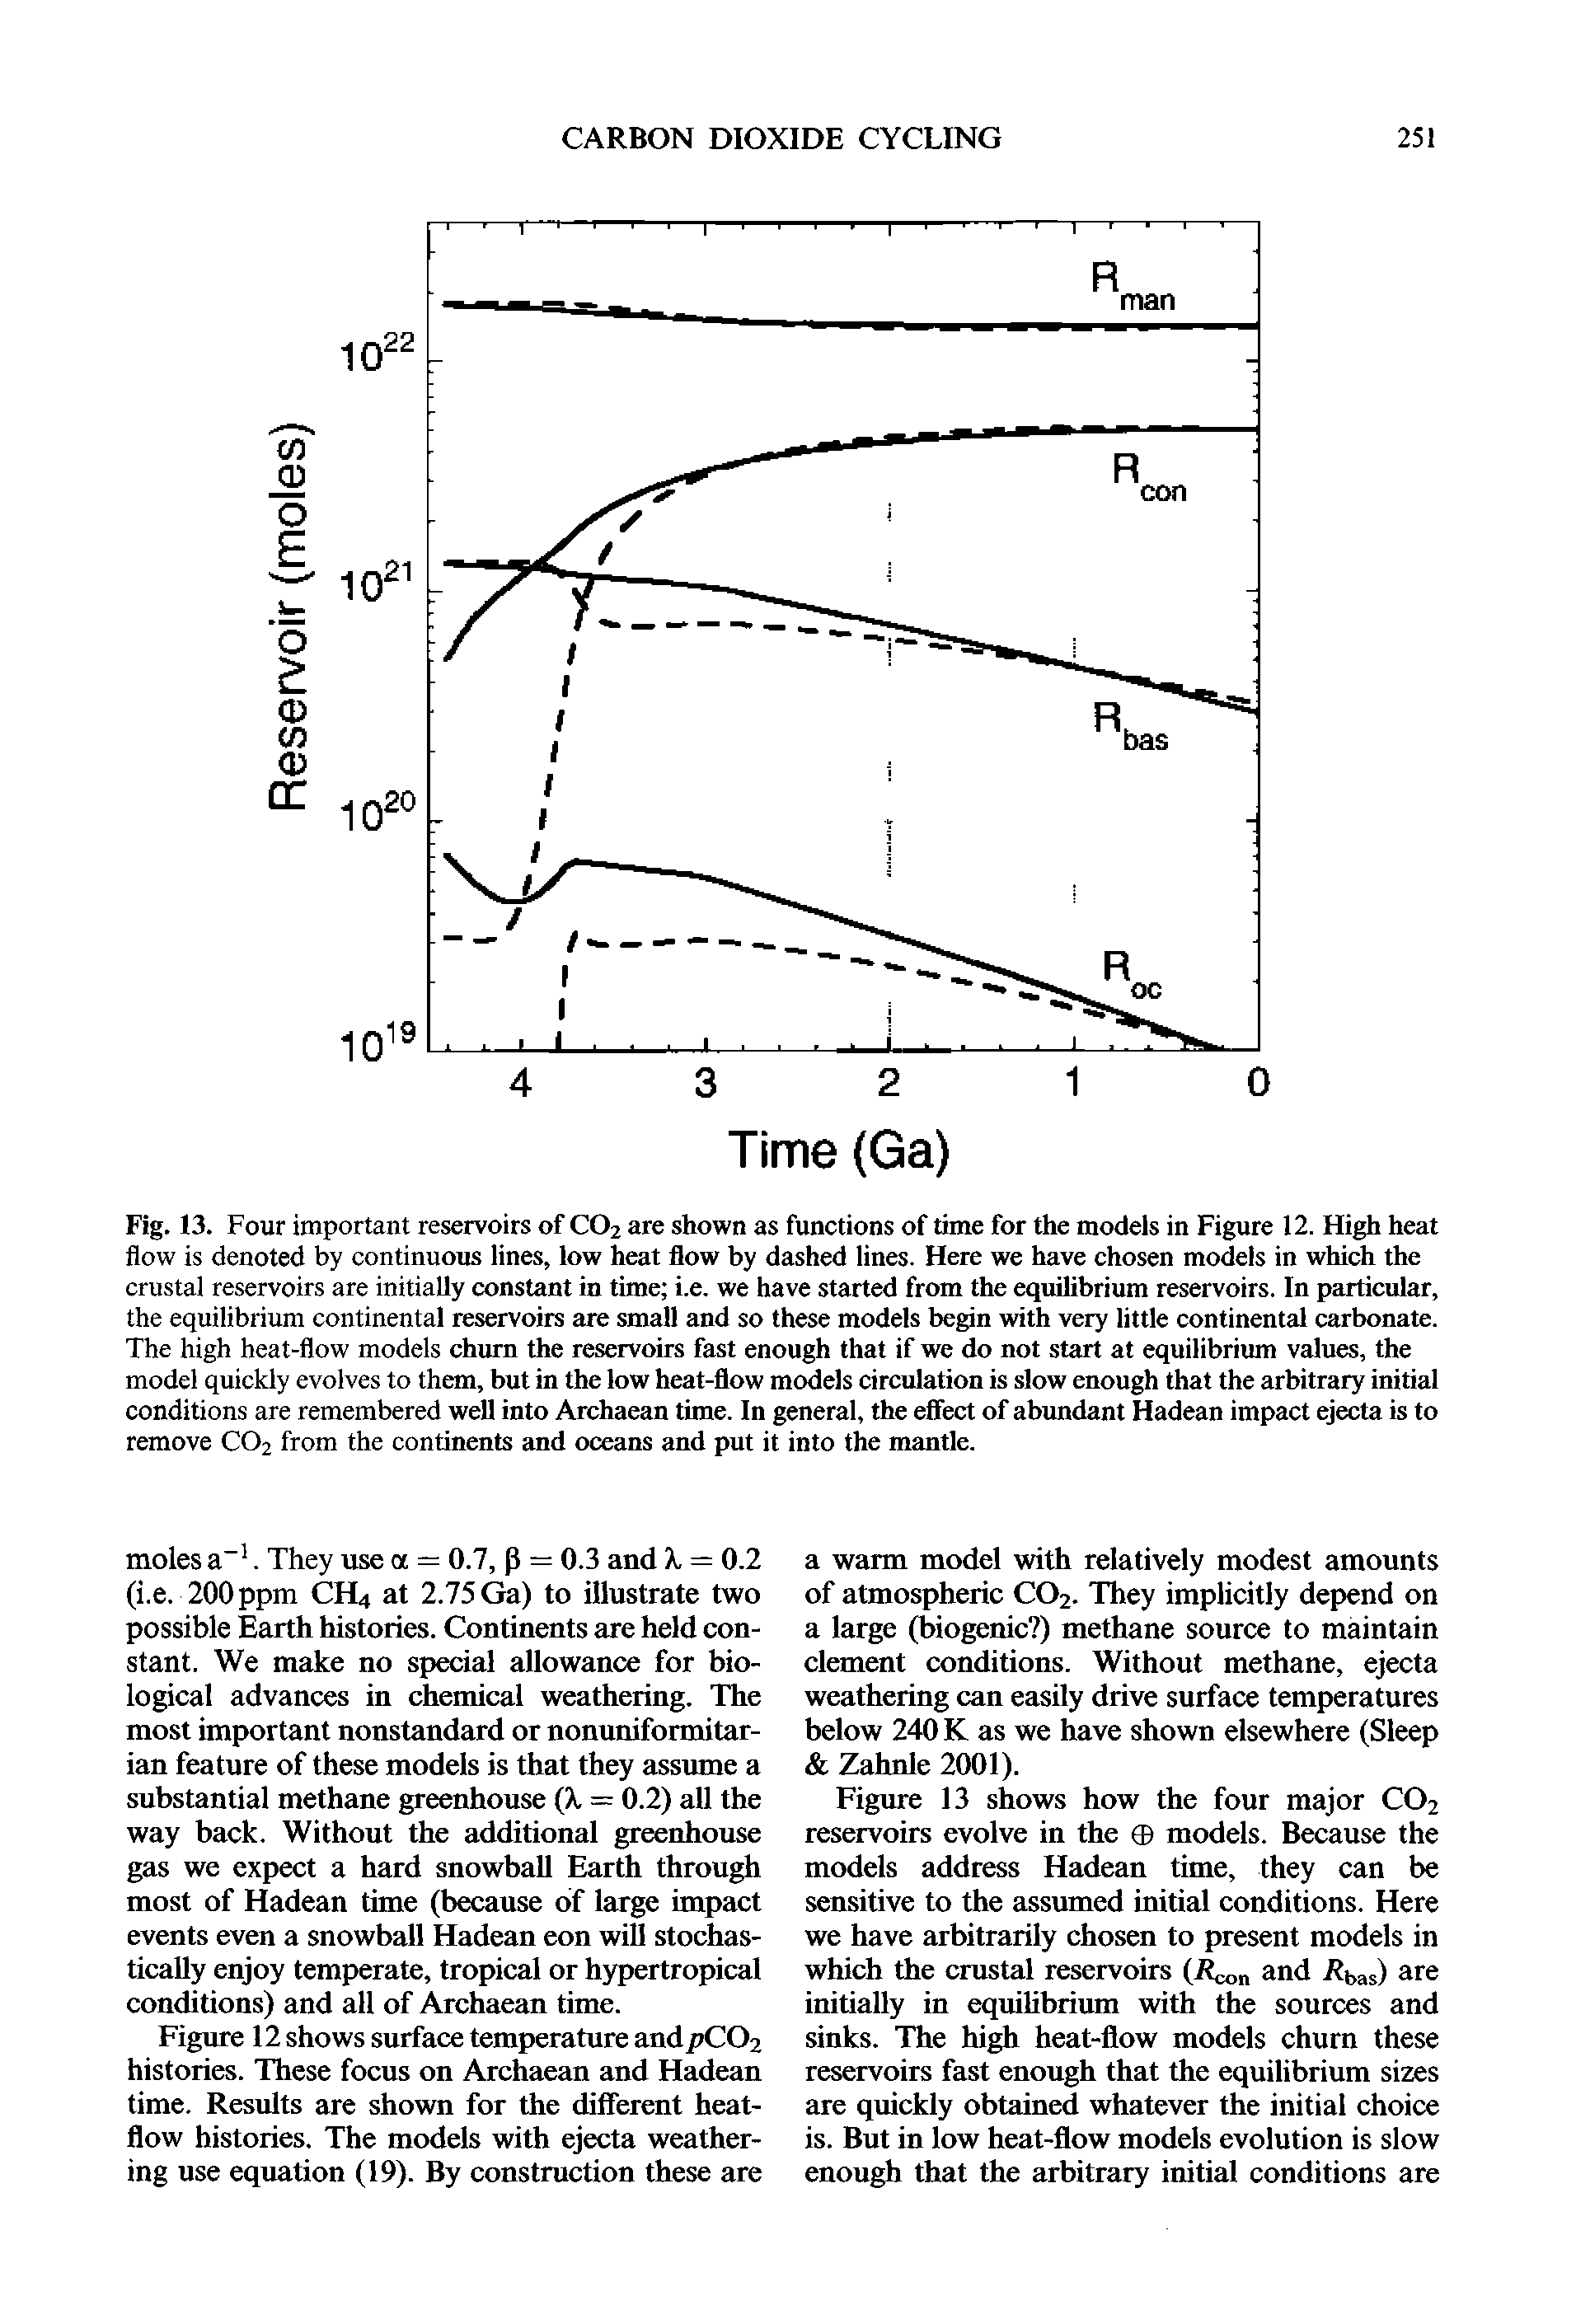 Fig. 13. Four important reservoirs of CO2 are shown as functions of time for the models in Figure 12. High heat flow is denoted by continuous lines, low heat flow by dashed lines. Here we have chosen models in which the crustal reservoirs are initially constant in time i.e. we have started from the equilibrium reservoirs. In particular, the equilibrium continental reservoirs are small and so these models begin with very little continental carbonate. The high heat-flow models chiun the reservoirs fast enough that if we do not start at equilibrium values, the model quickly evolves to them, but in the low heat-flow models circulation is slow enough that the arbitrary initial conditions are remembered well into Archaean time. In general, the effect of abundant Hadean impact ejecta is to remove CO2 from the continents and oceans and put it into the mantle.